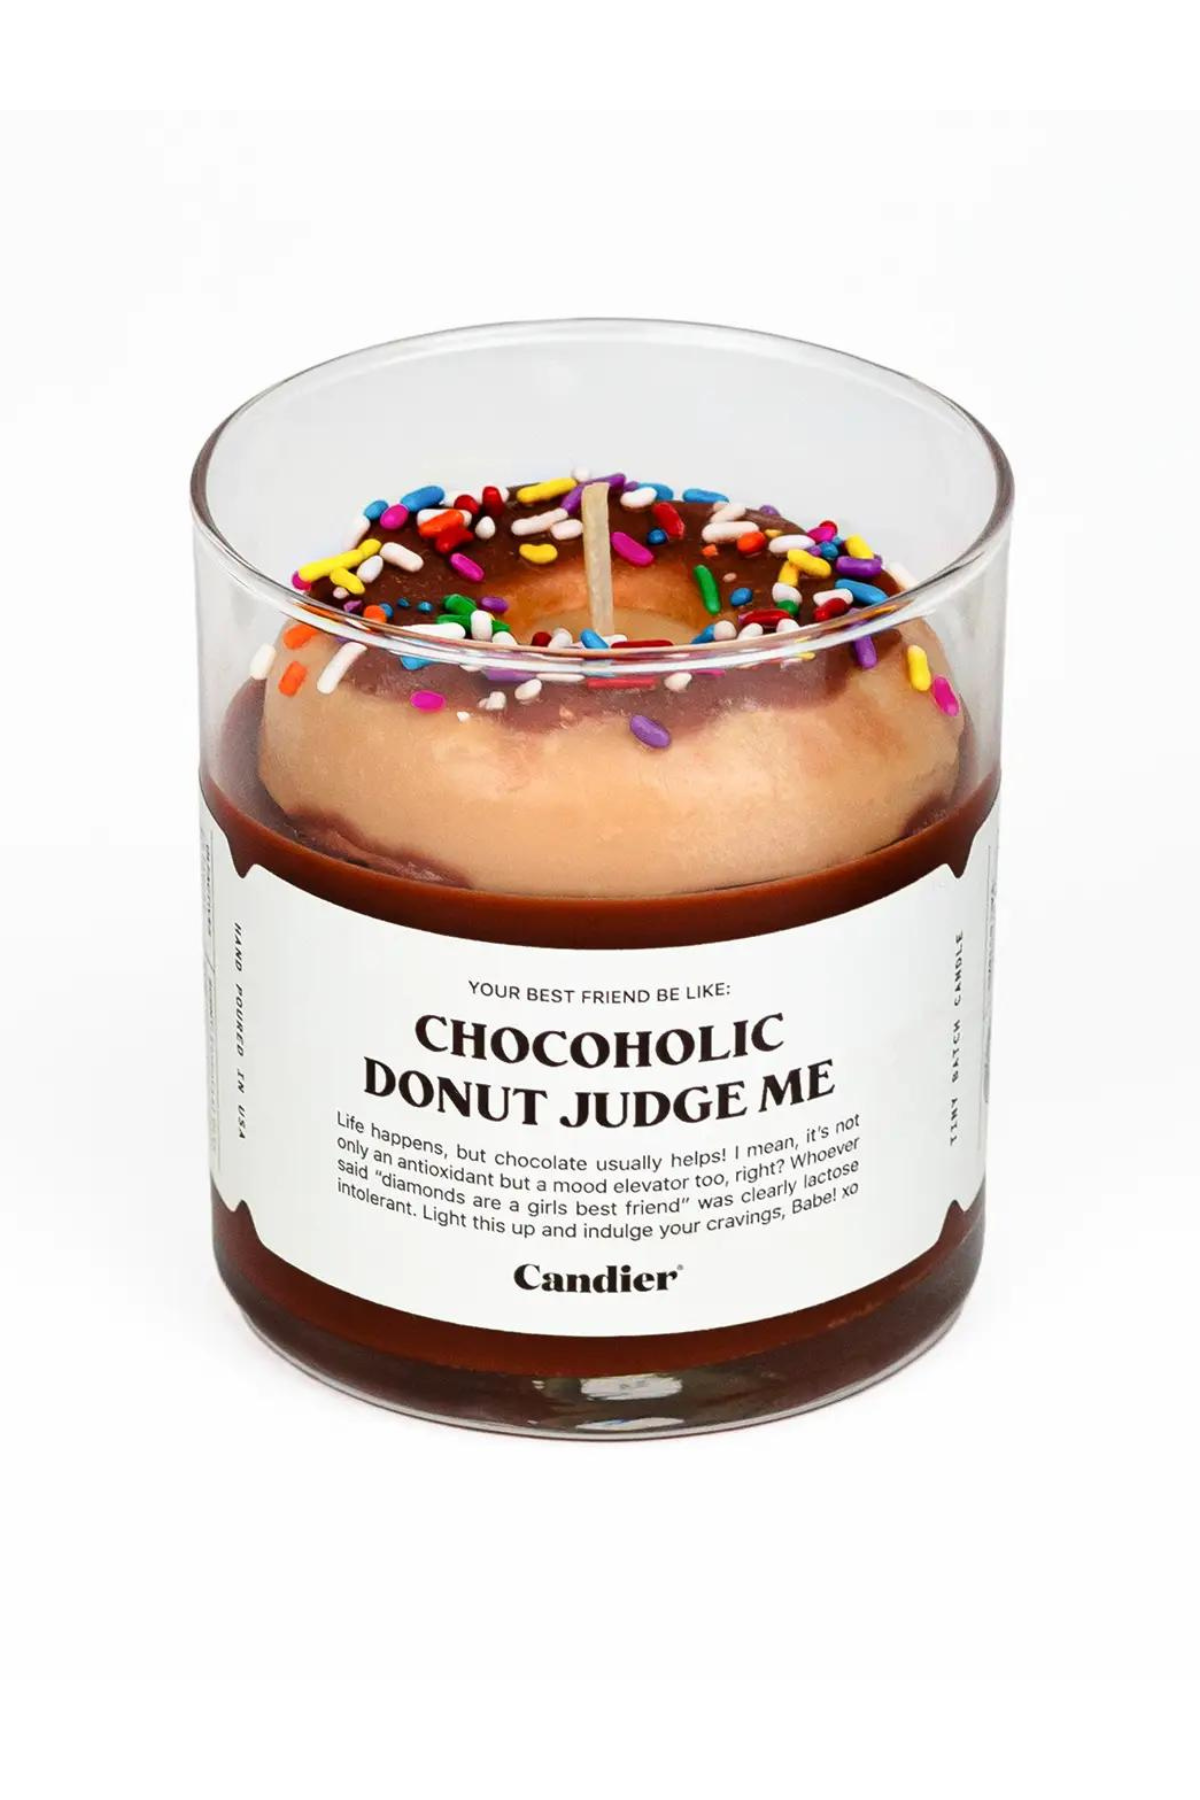 Candier Chocoholic Donut Judge Me Candle